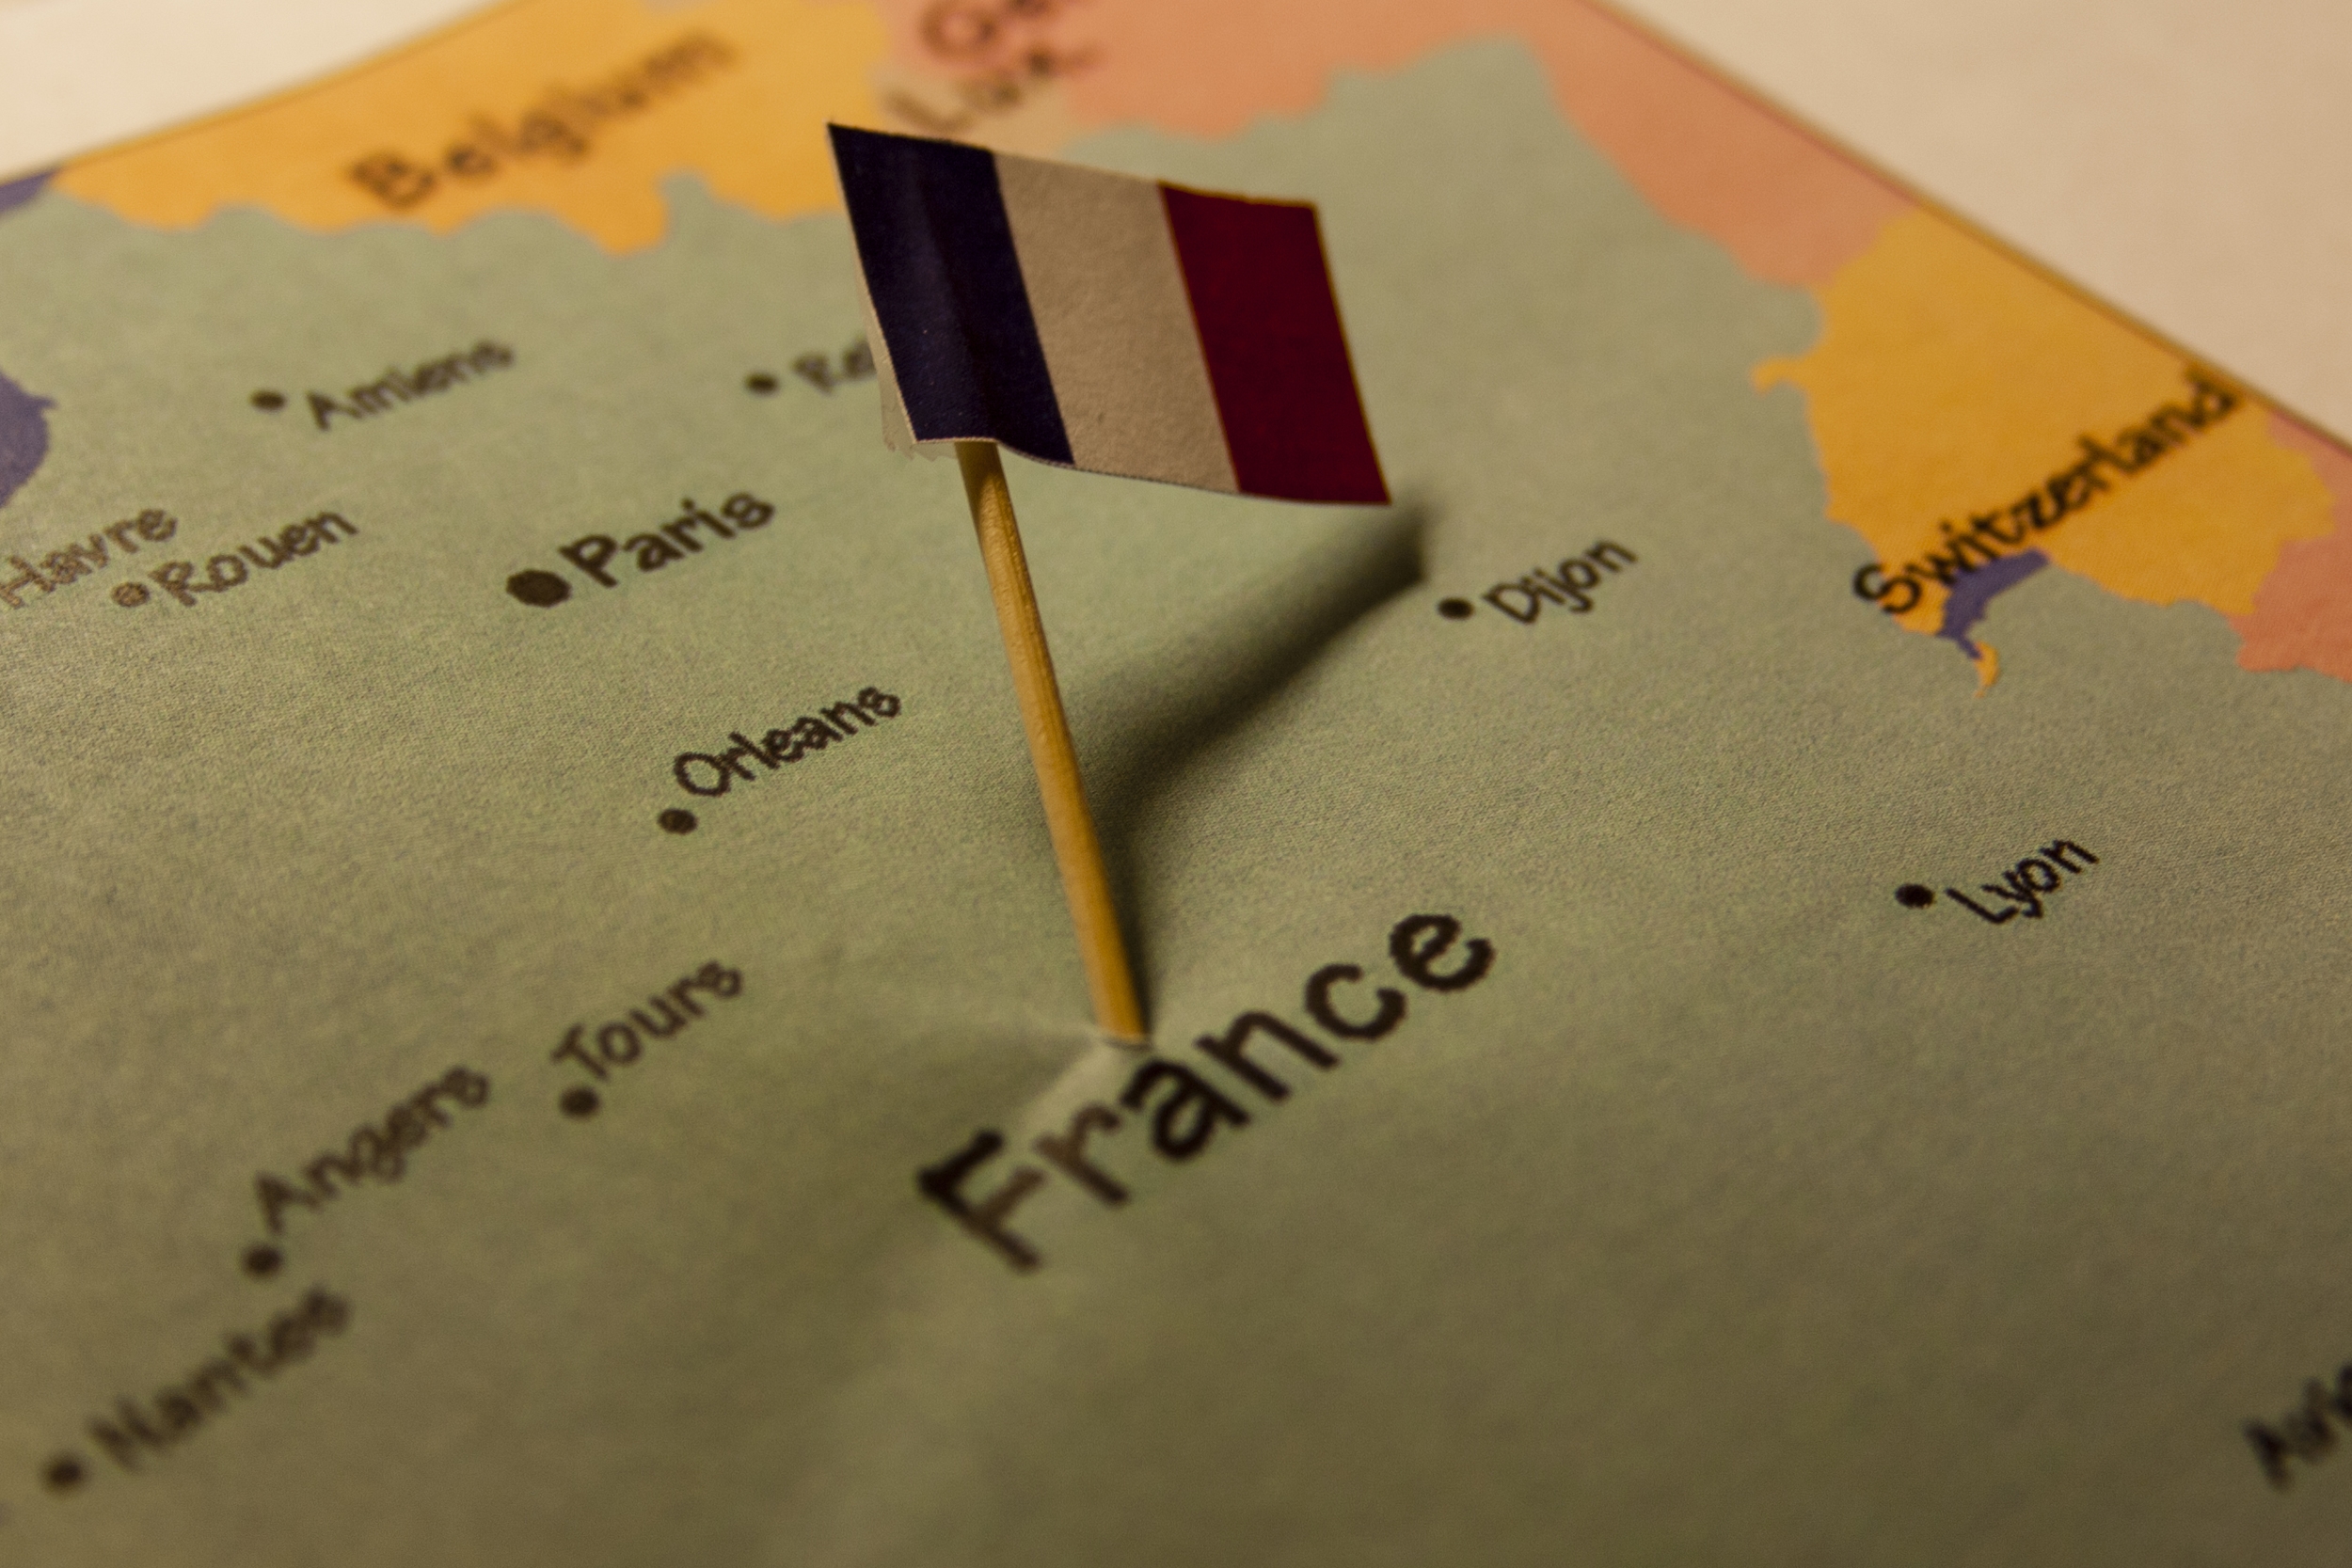 France map with flag: A map of France with its national flag displayed. The flag consists of three vertical stripes of blue, white, and red.